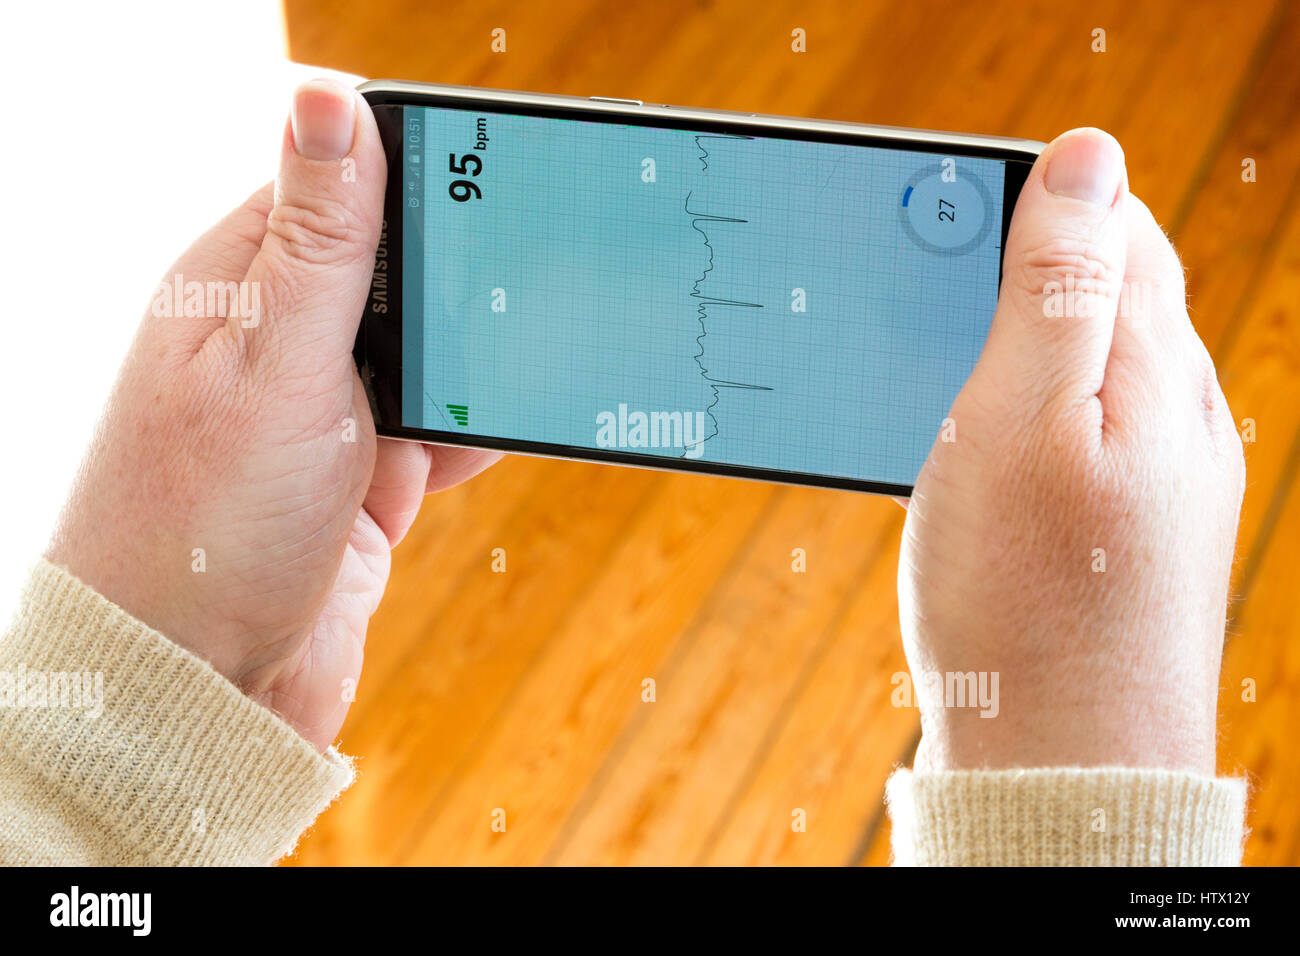 Kardia heart monitor app being used on a Samsung android phone Stock Photo